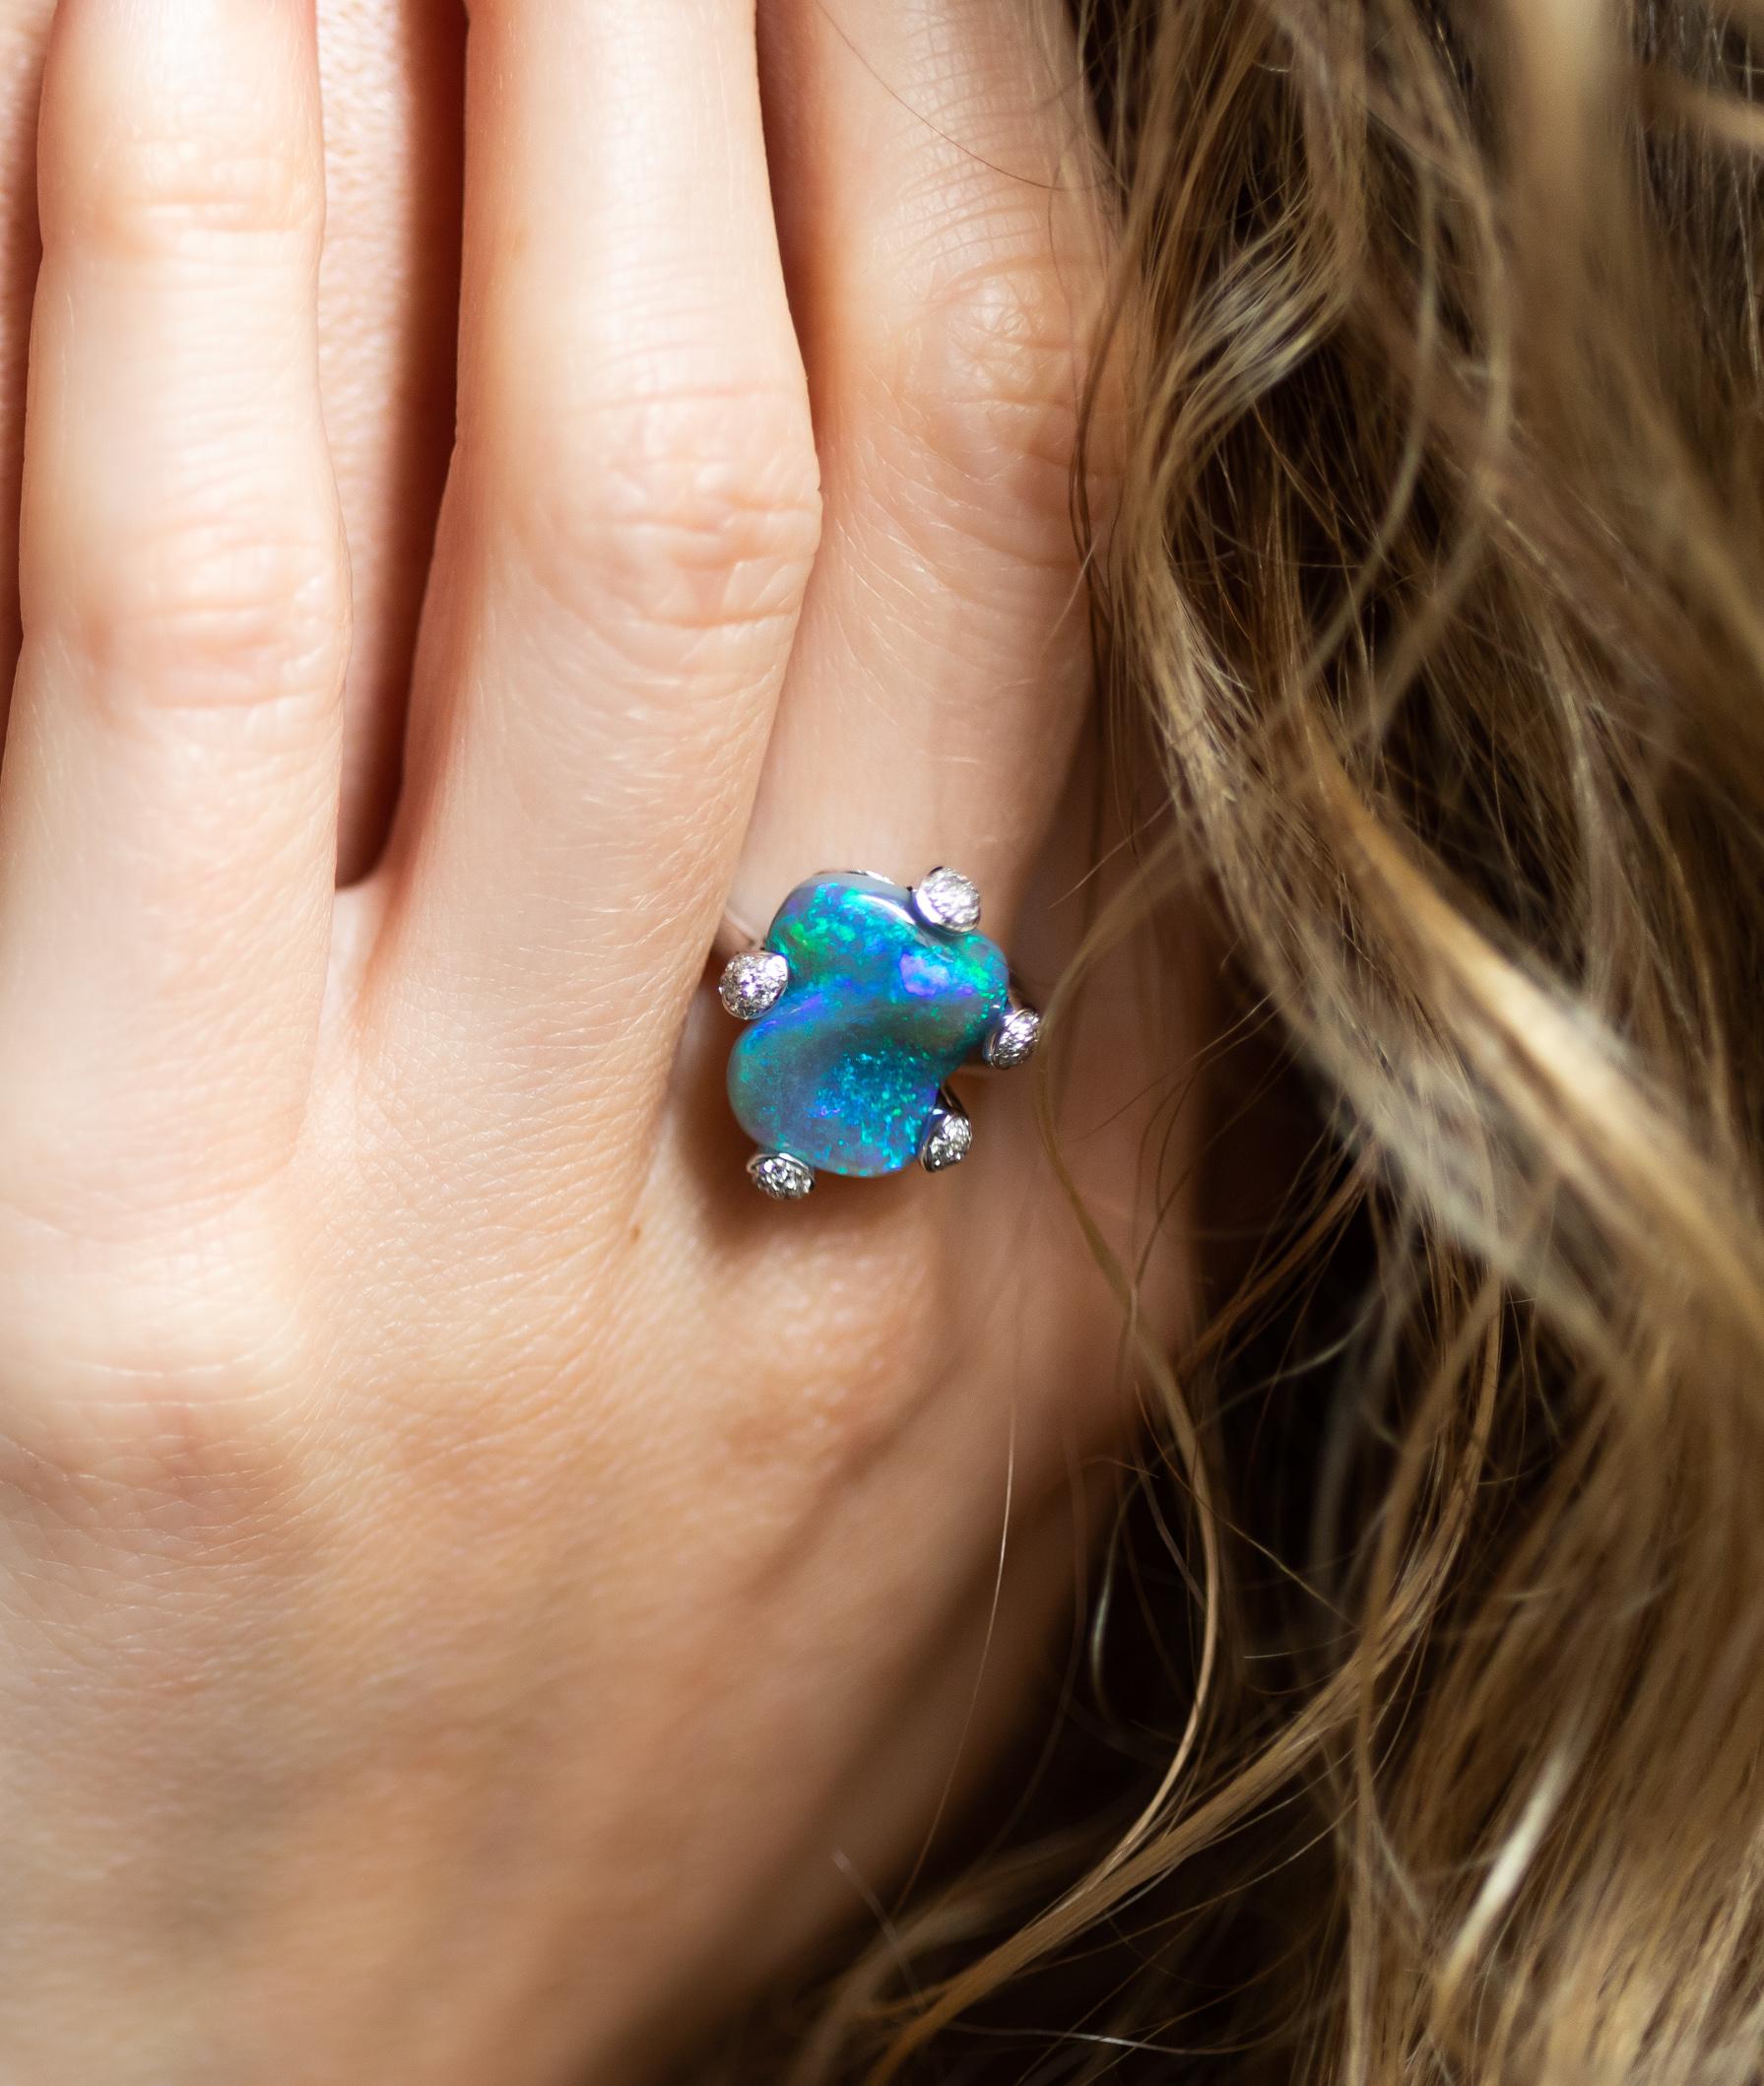 Distinctive and unusual “Maiden Spring” presents a carved black opal (2.36ct) from Lightning Ridge cradled by minute hands of 18K white gold and shimmering diamonds. This expertly crafted opal ring is a celebration of love, beauty and joy. Designed